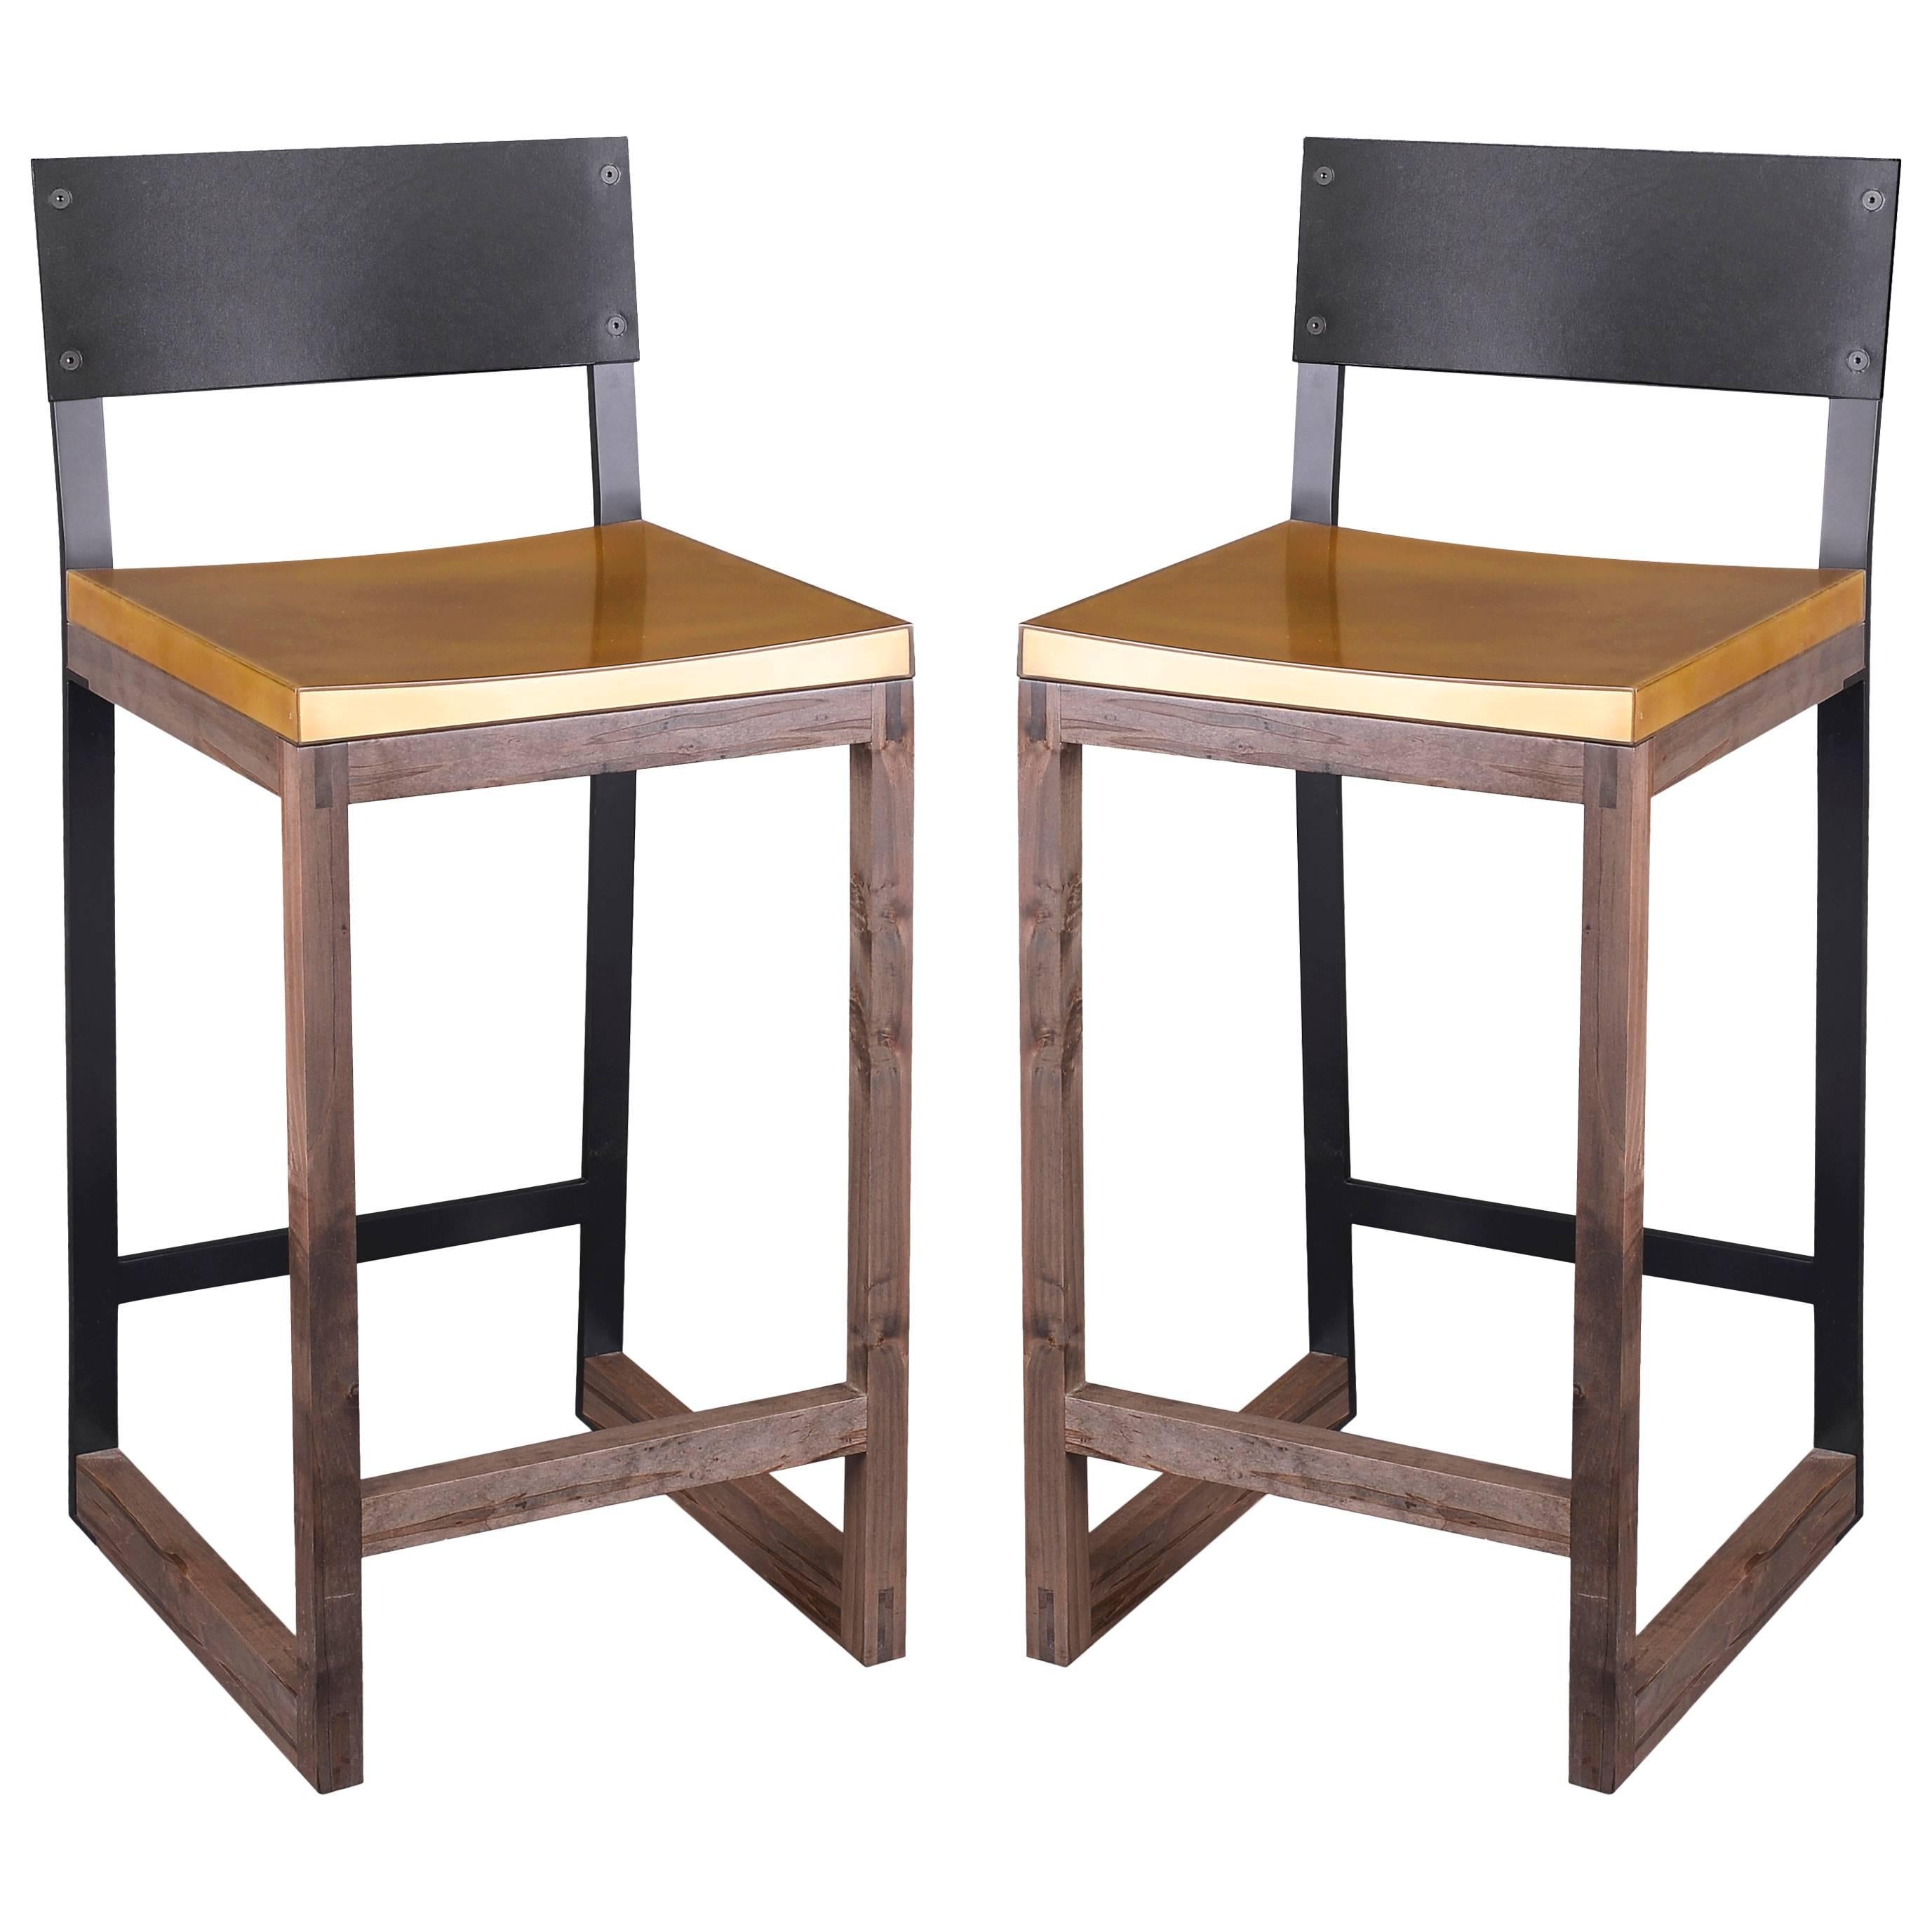 Gotham Stools Customizable Metal, Wood and Resin - Bar Height For Sale